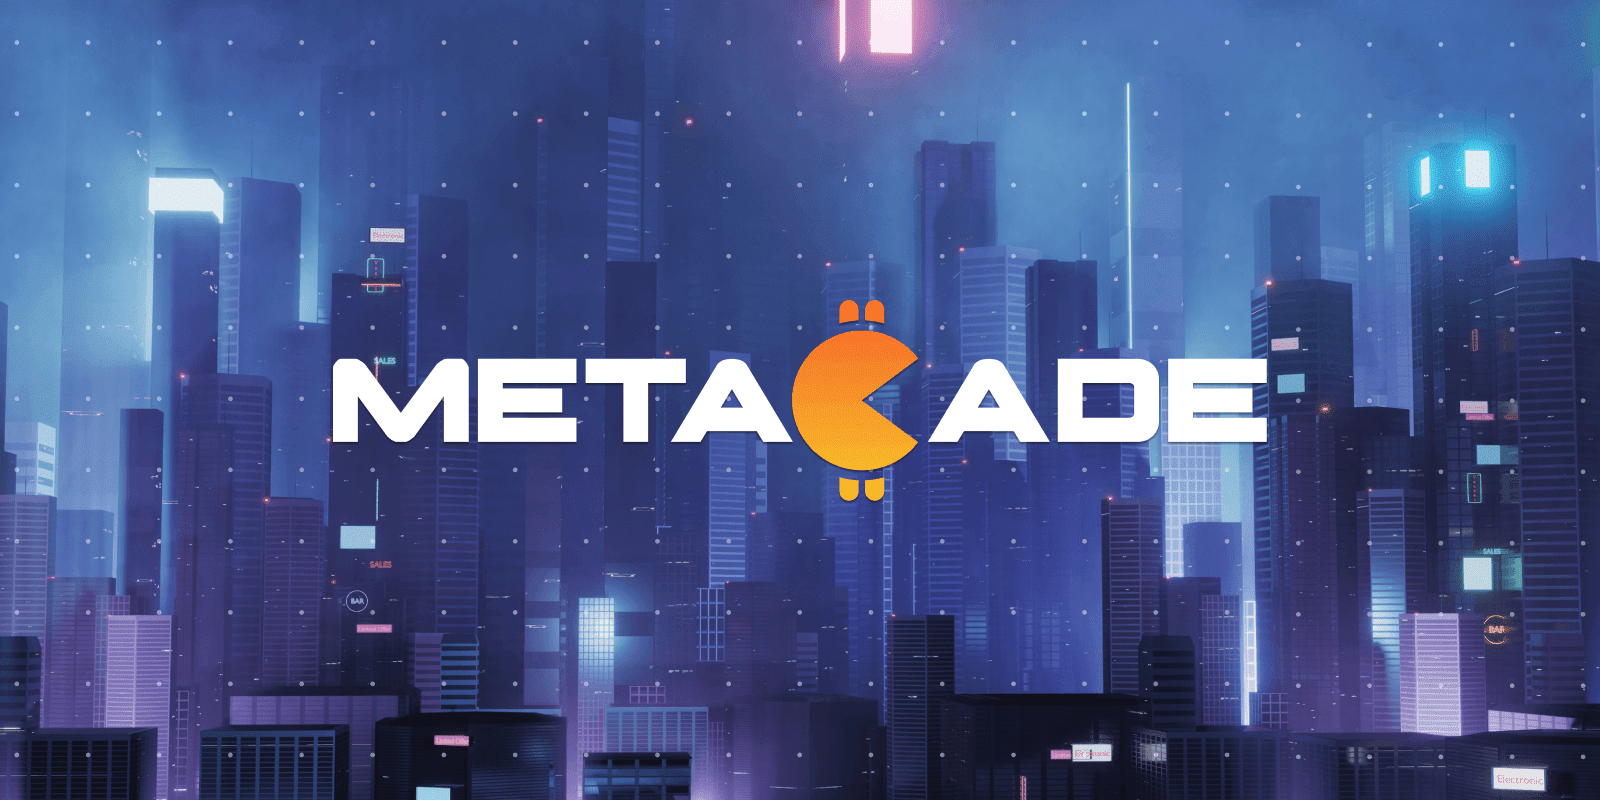 Despite Scandals and Market Volatility, the Future Of Crypto Looks Bright, Especially for Companies Like Metacade